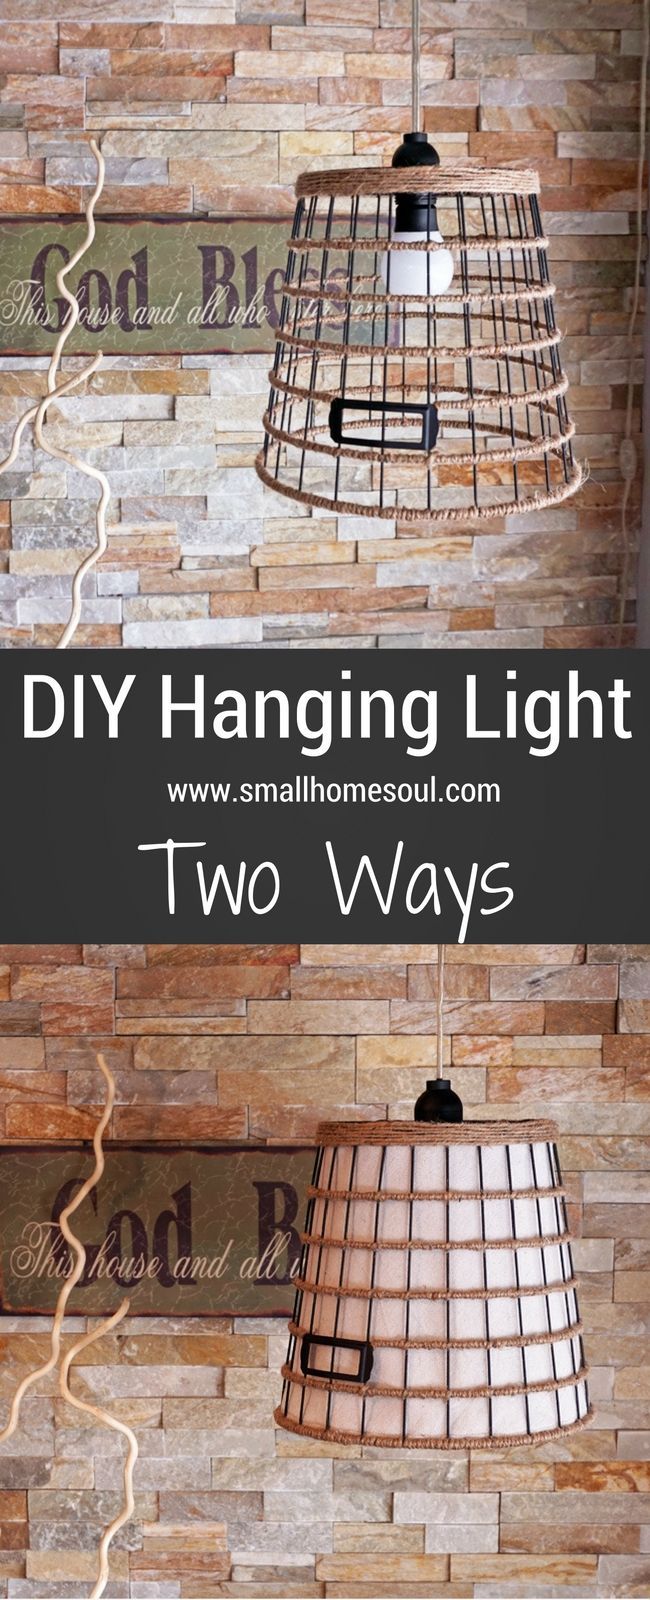 The design possibilities are endless to create your own beautiful DIY Hanging Li...